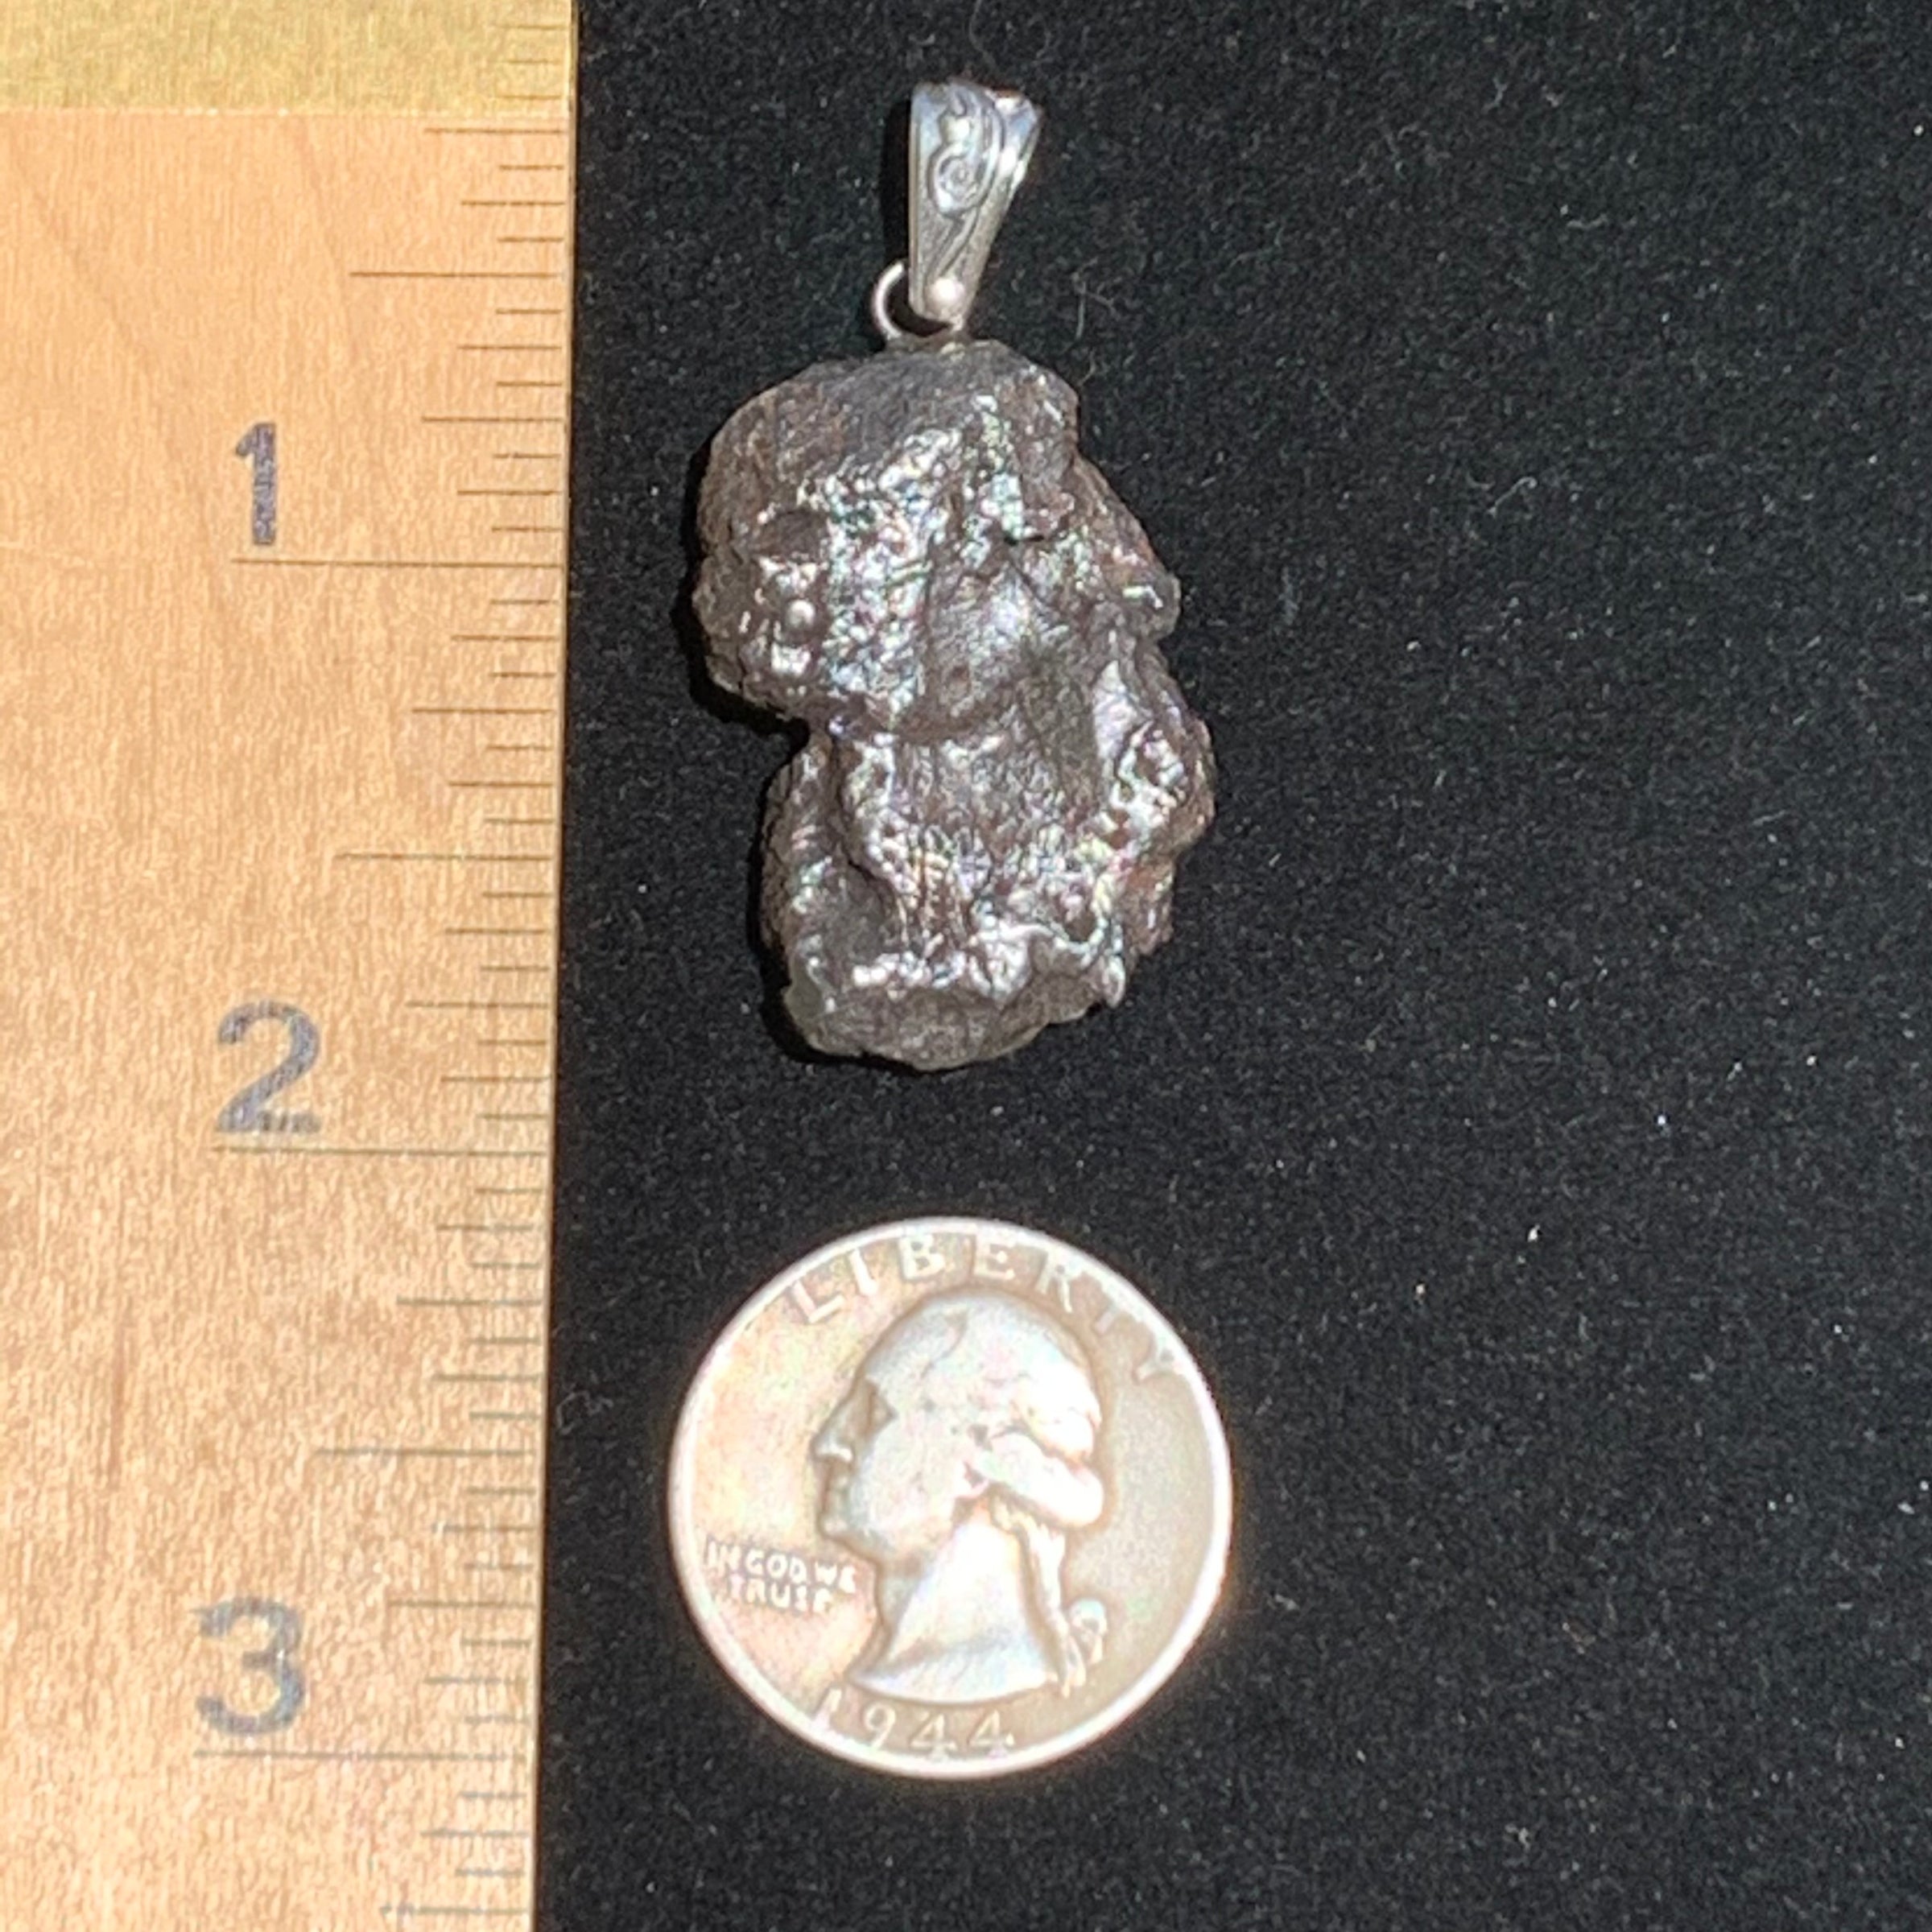 One Sikhote Aline meteorite pendant sits next to a ruler and quarter